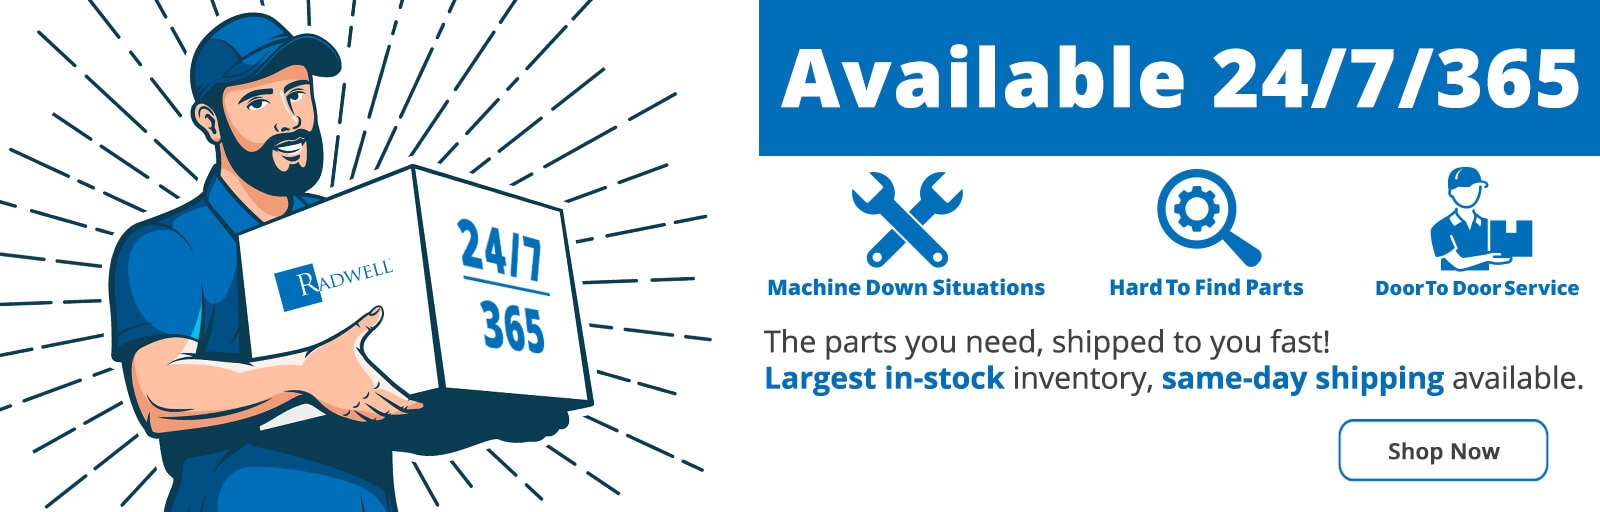 The parts you need, shipped to you fast! Largest in-stock inventory, same-day shipping available.